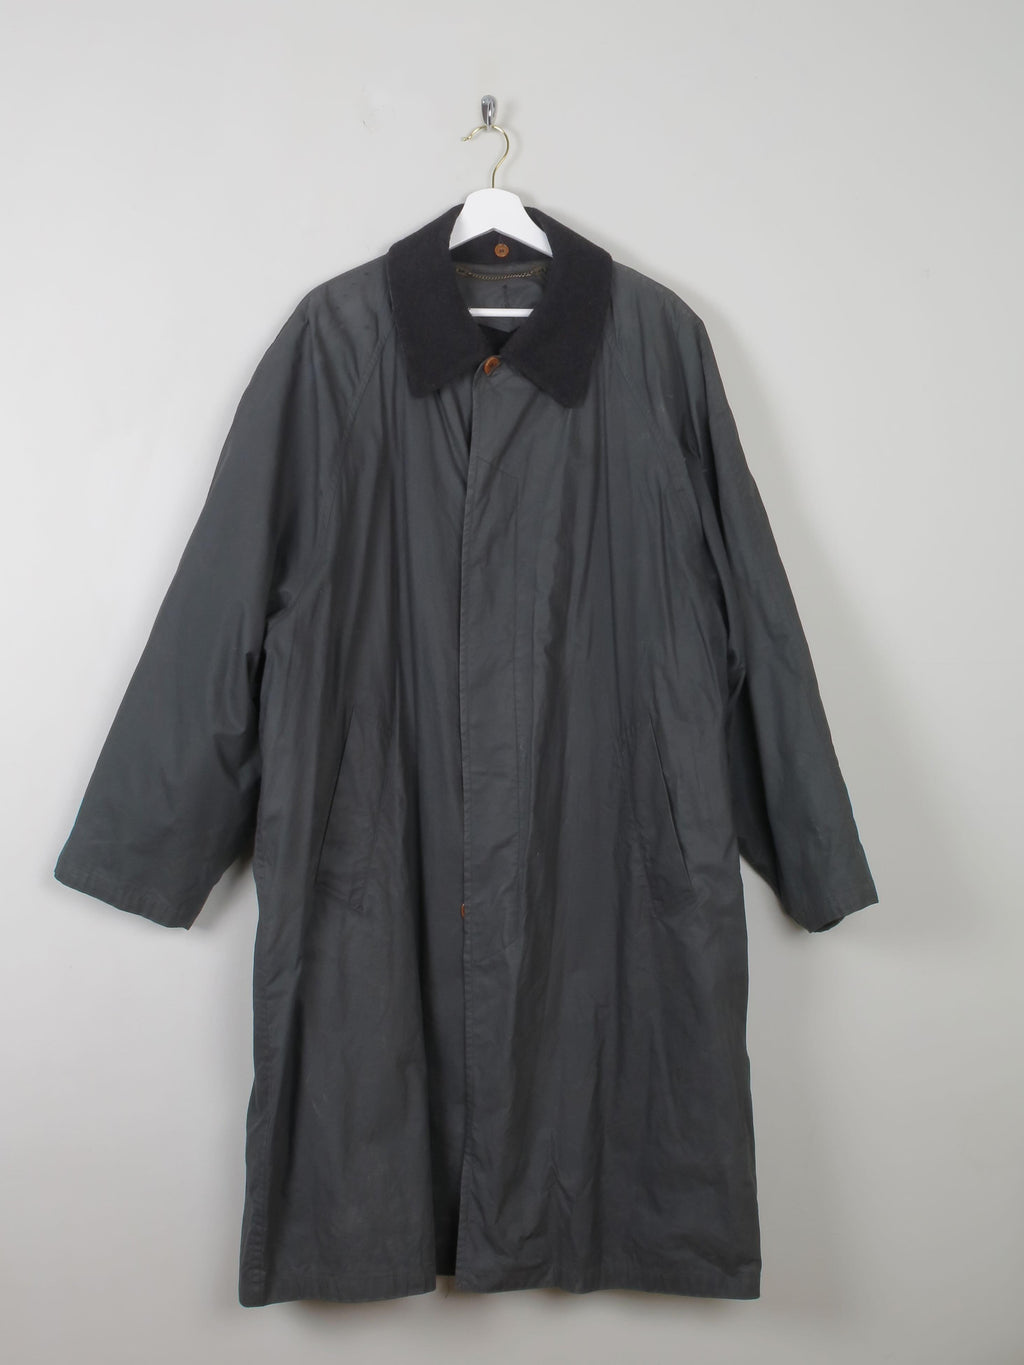 Men's Green Waxed Lined Trench Coat L/XL - The Harlequin